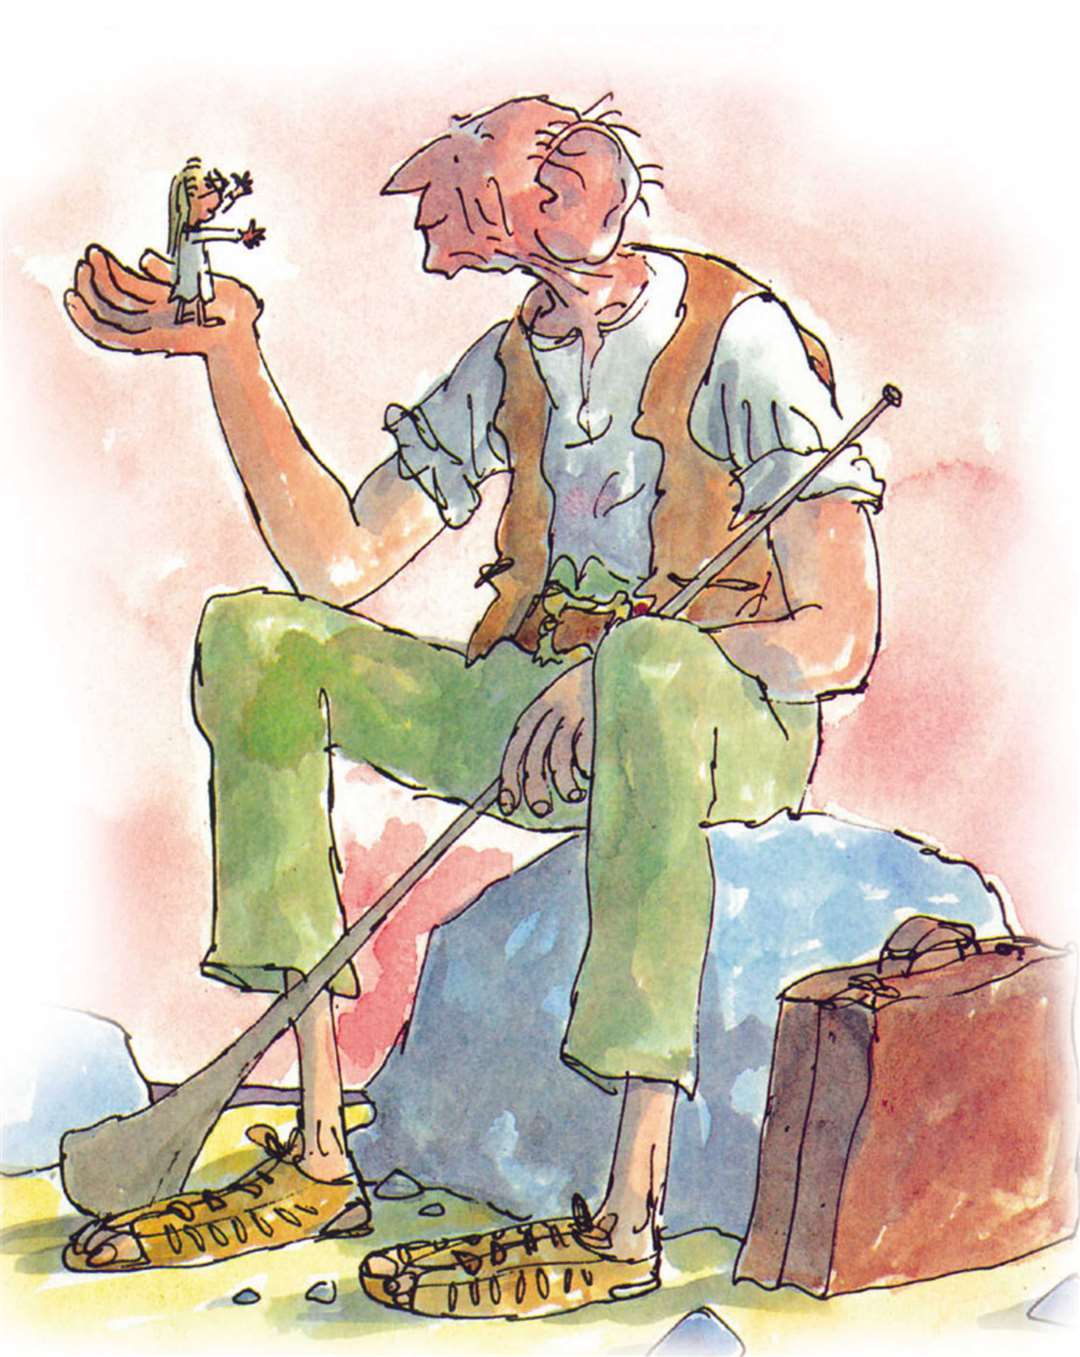 The BFG - Big Friendly Giant, one of Roald Dahl's much-loved stories